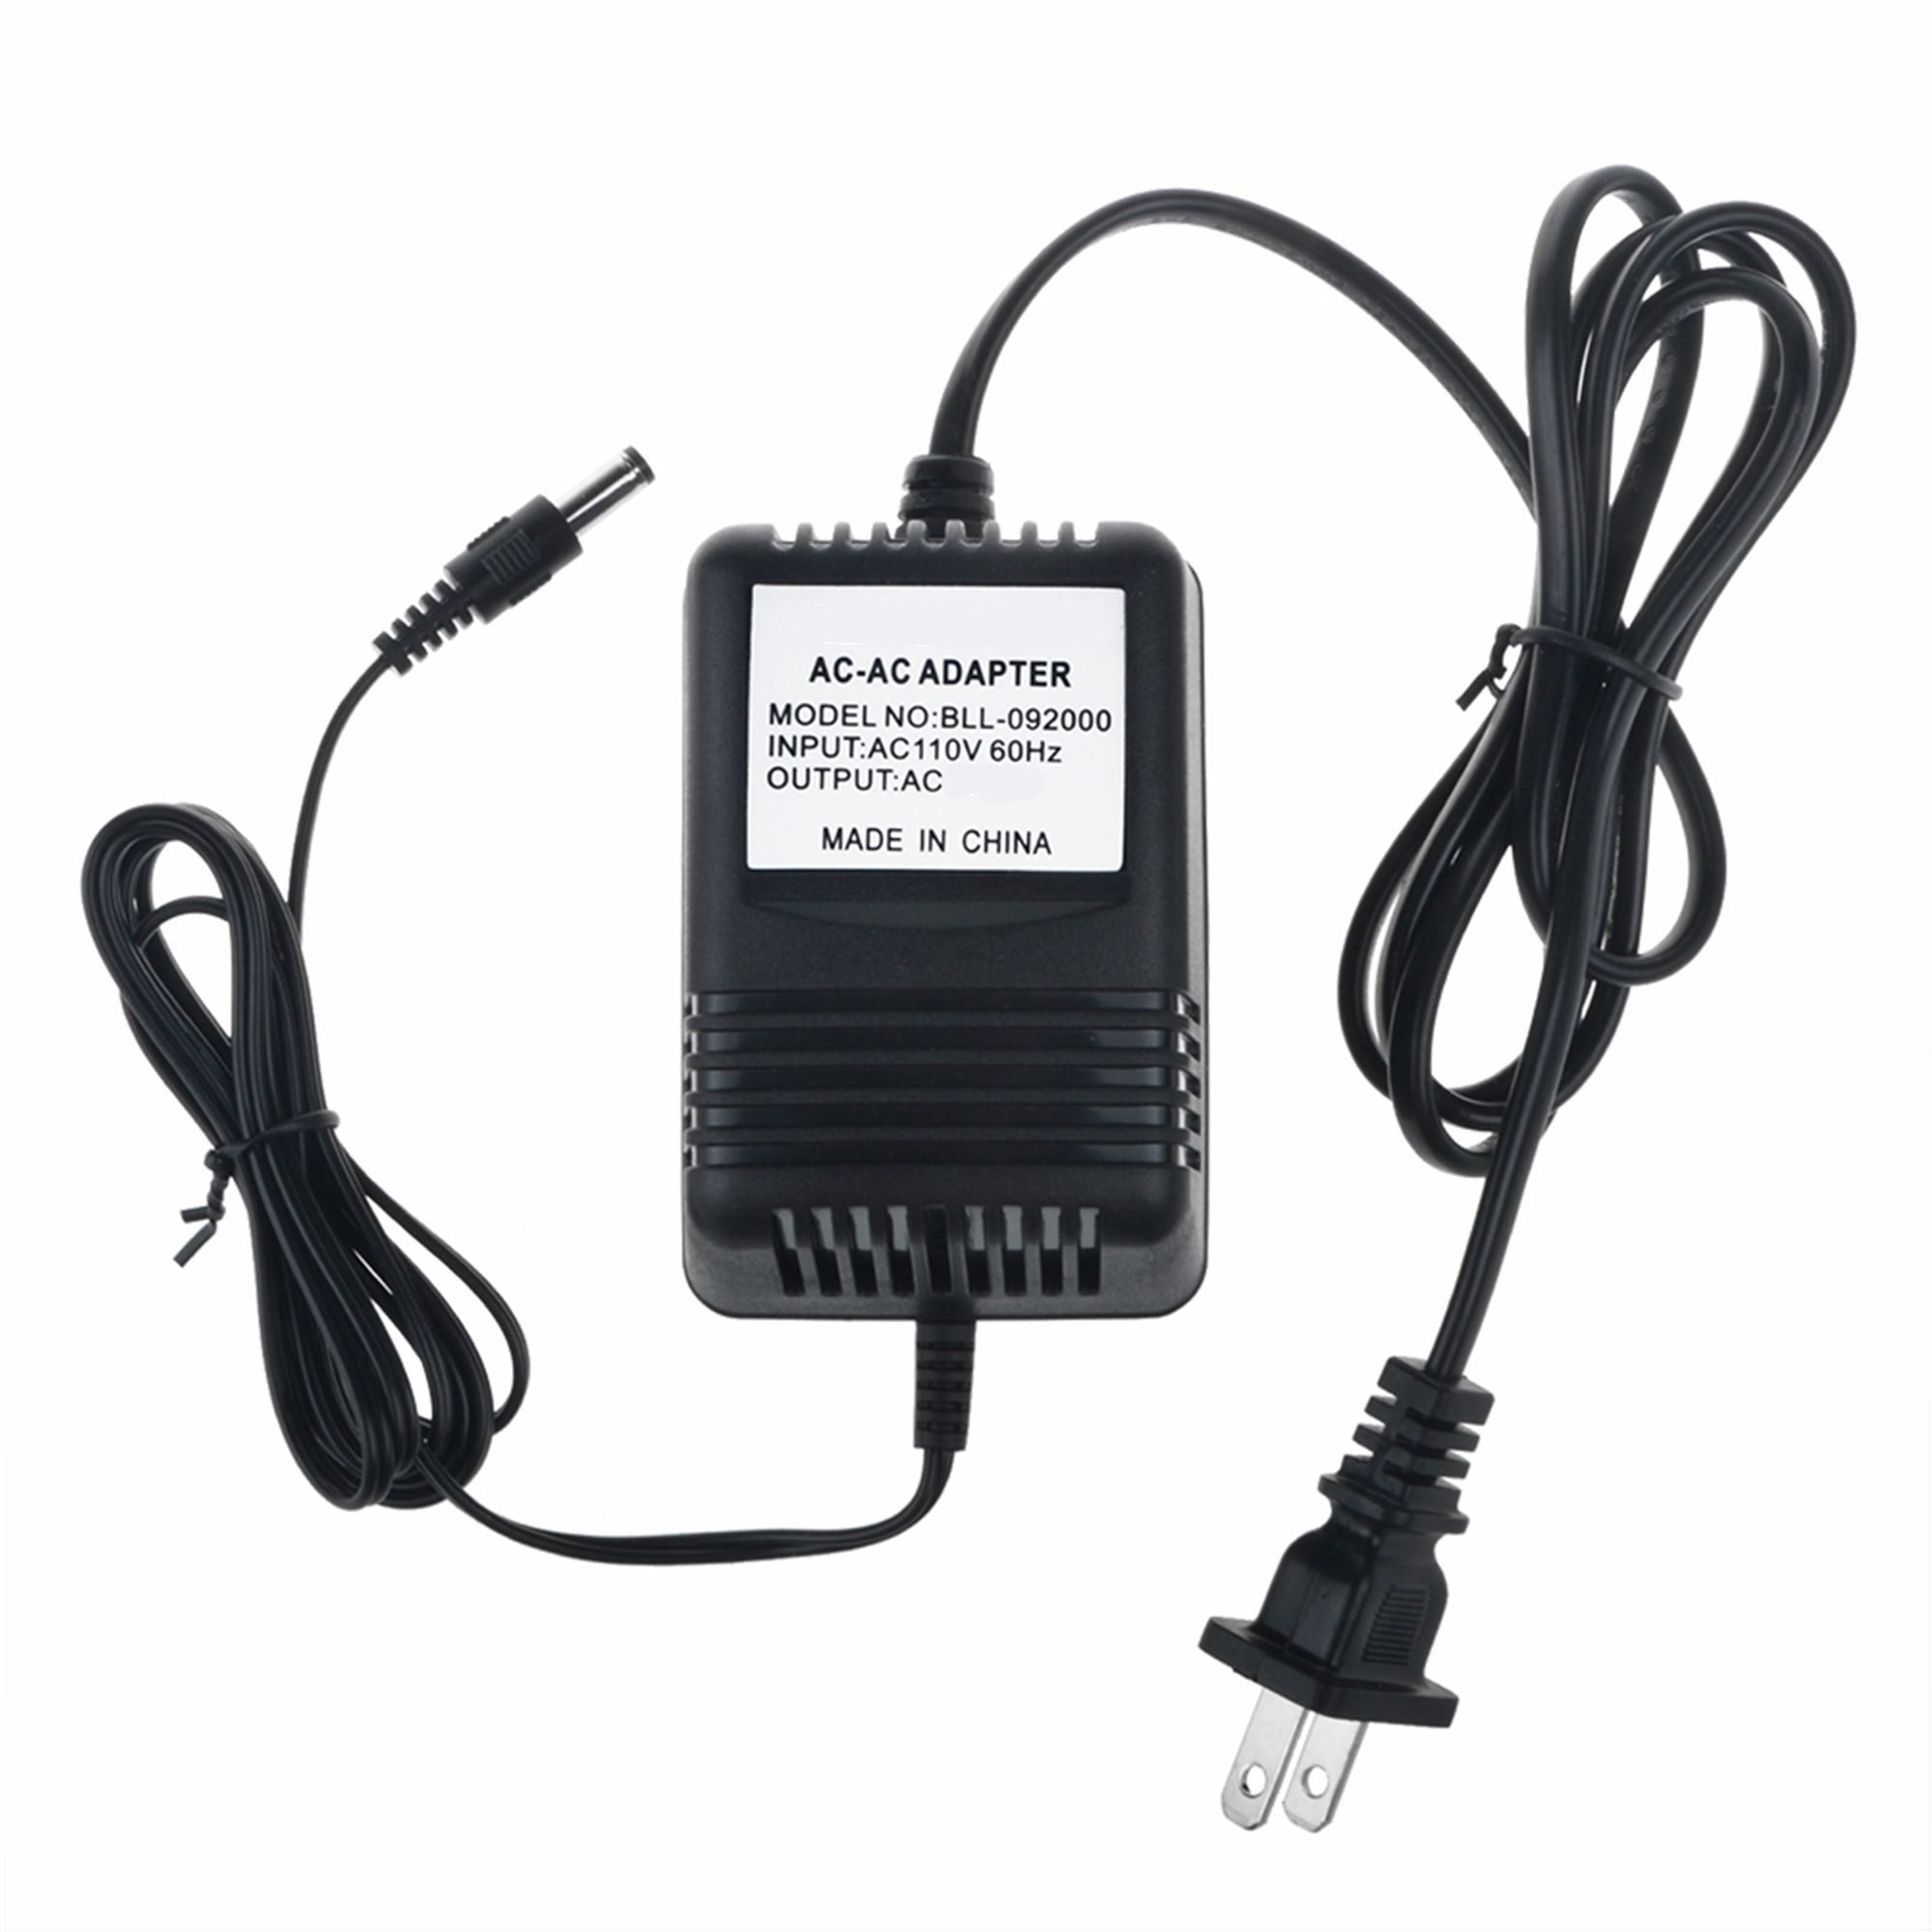 AC Adapter For Petsafe Containment System W402-1886 300-678 Dog Fence Transmit 